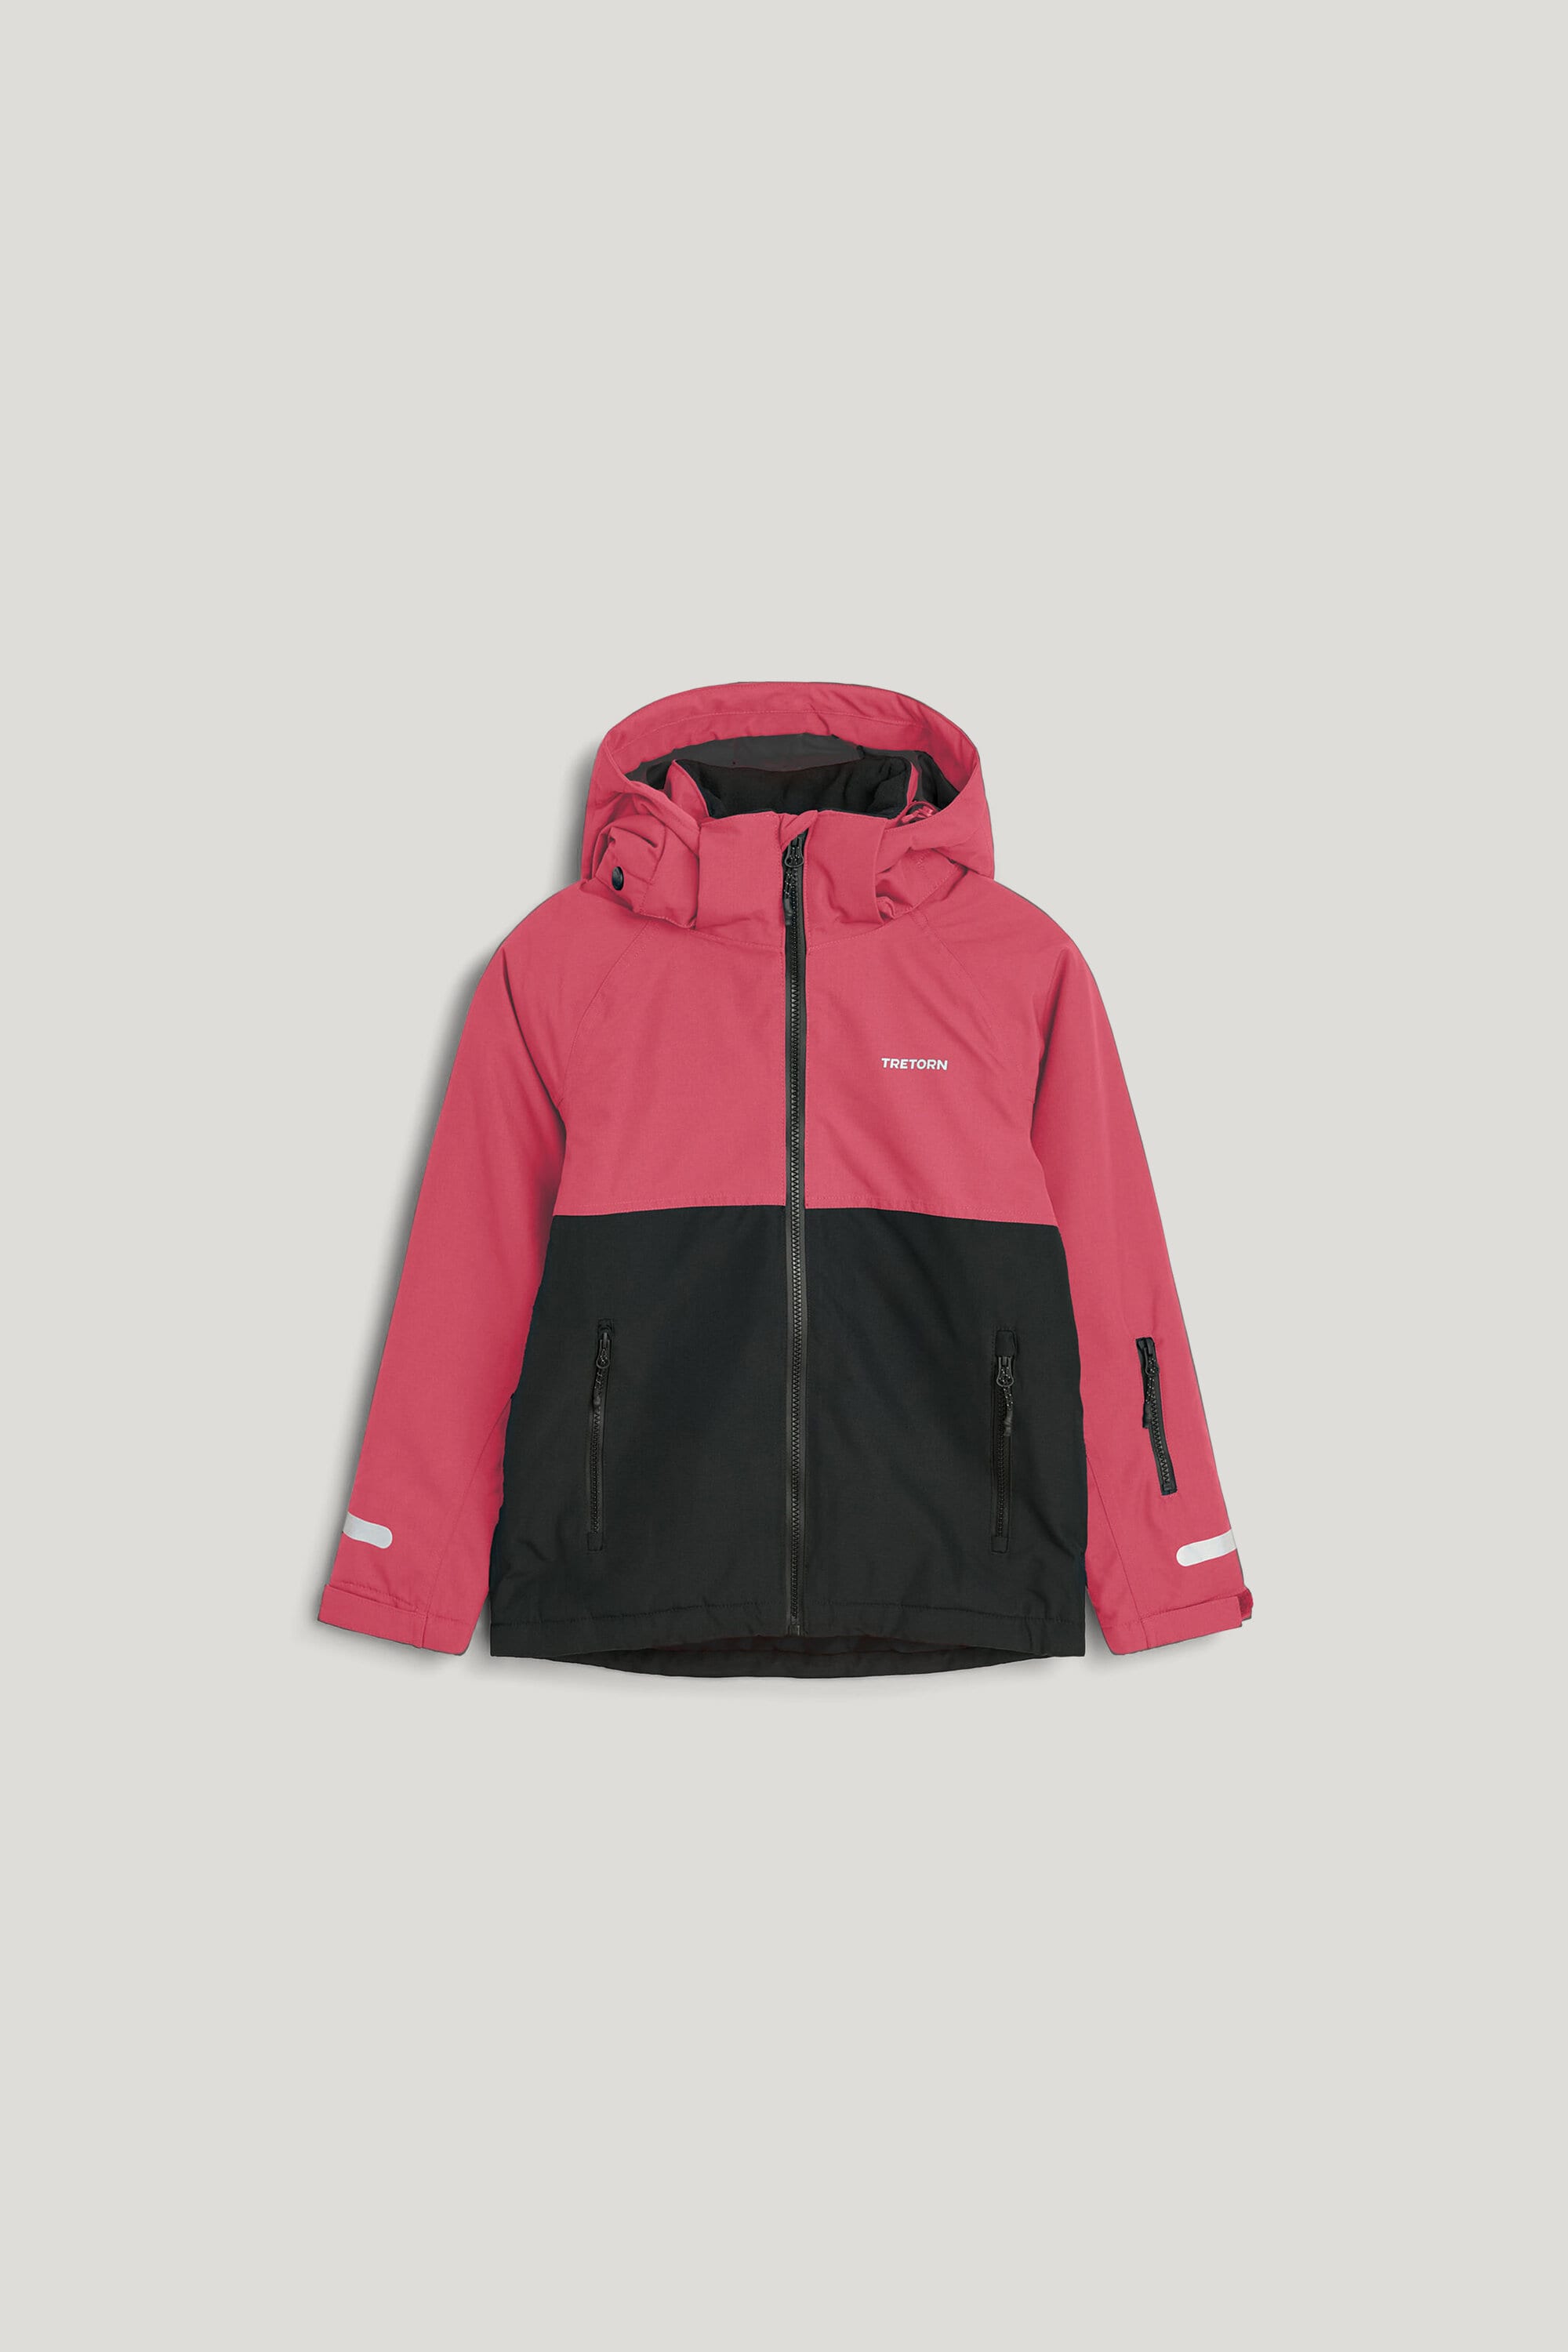 | outerwear Tretorn for Functional kids